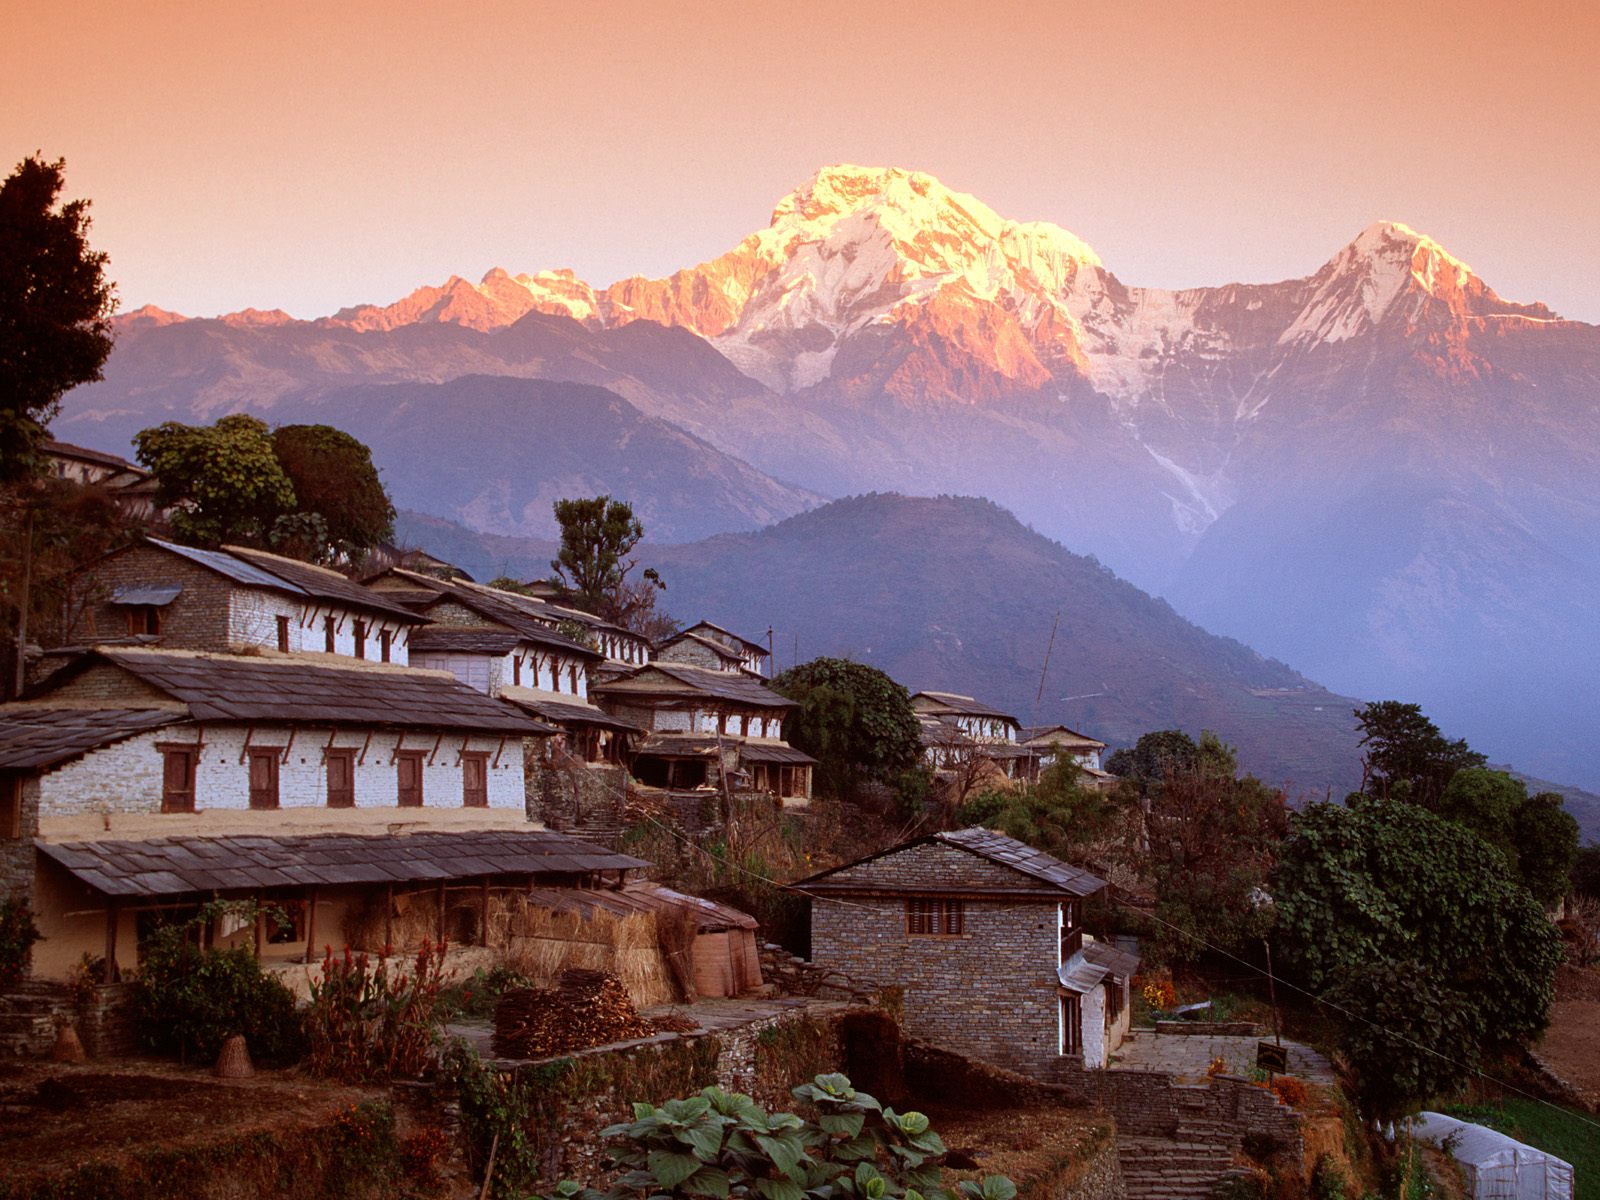 Ghandrung Village / Nepal / Himalaya wallpapers and images - wallpapers